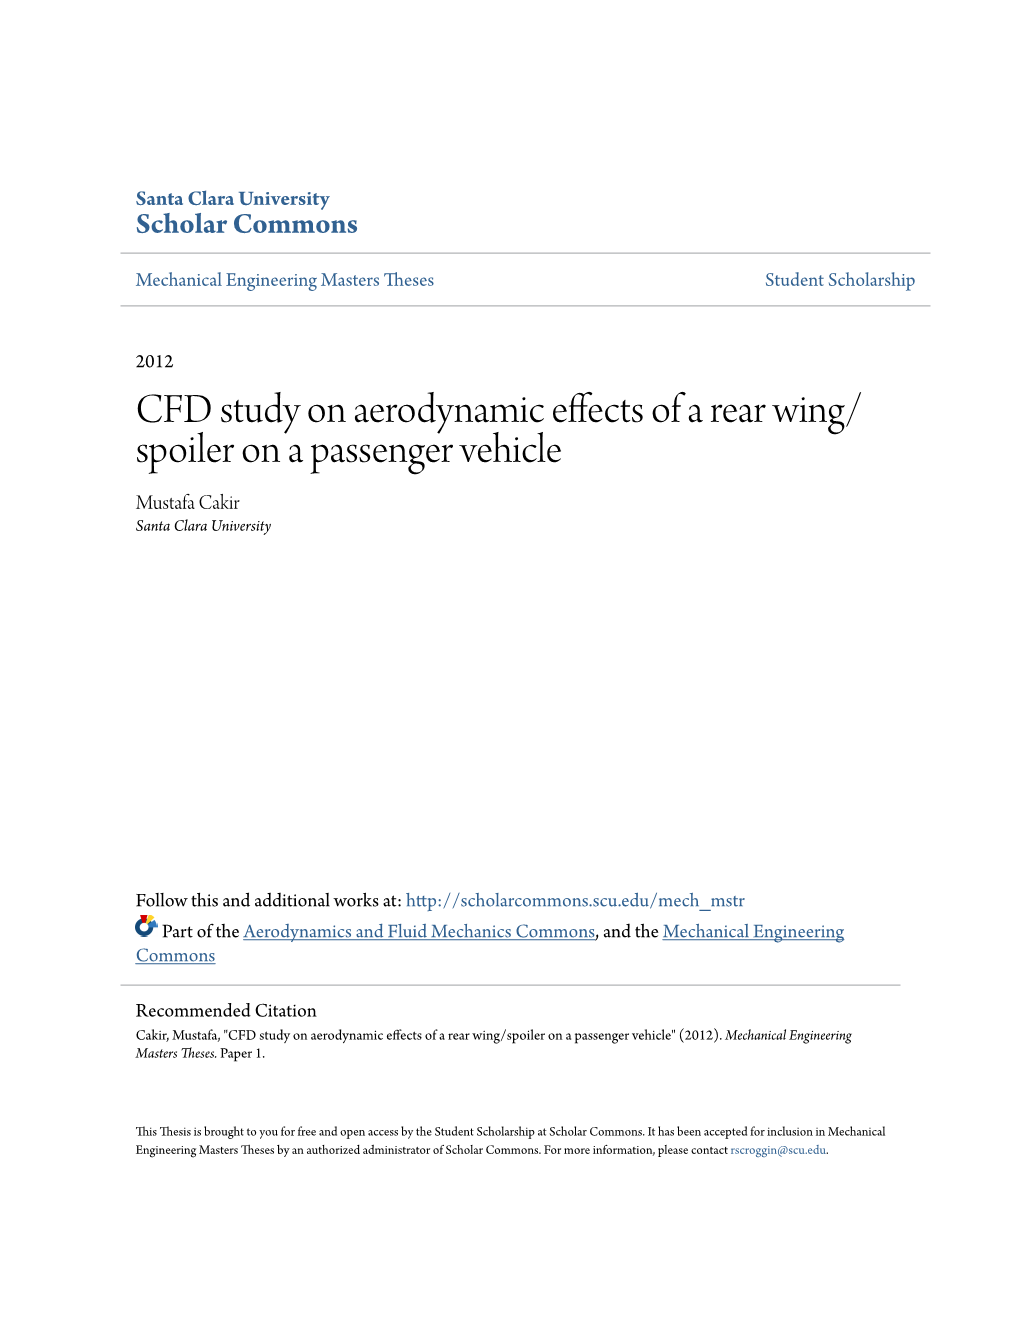 CFD Study on Aerodynamic Effects of a Rear Wing/Spoiler on a Passenger Vehicle" (2012)